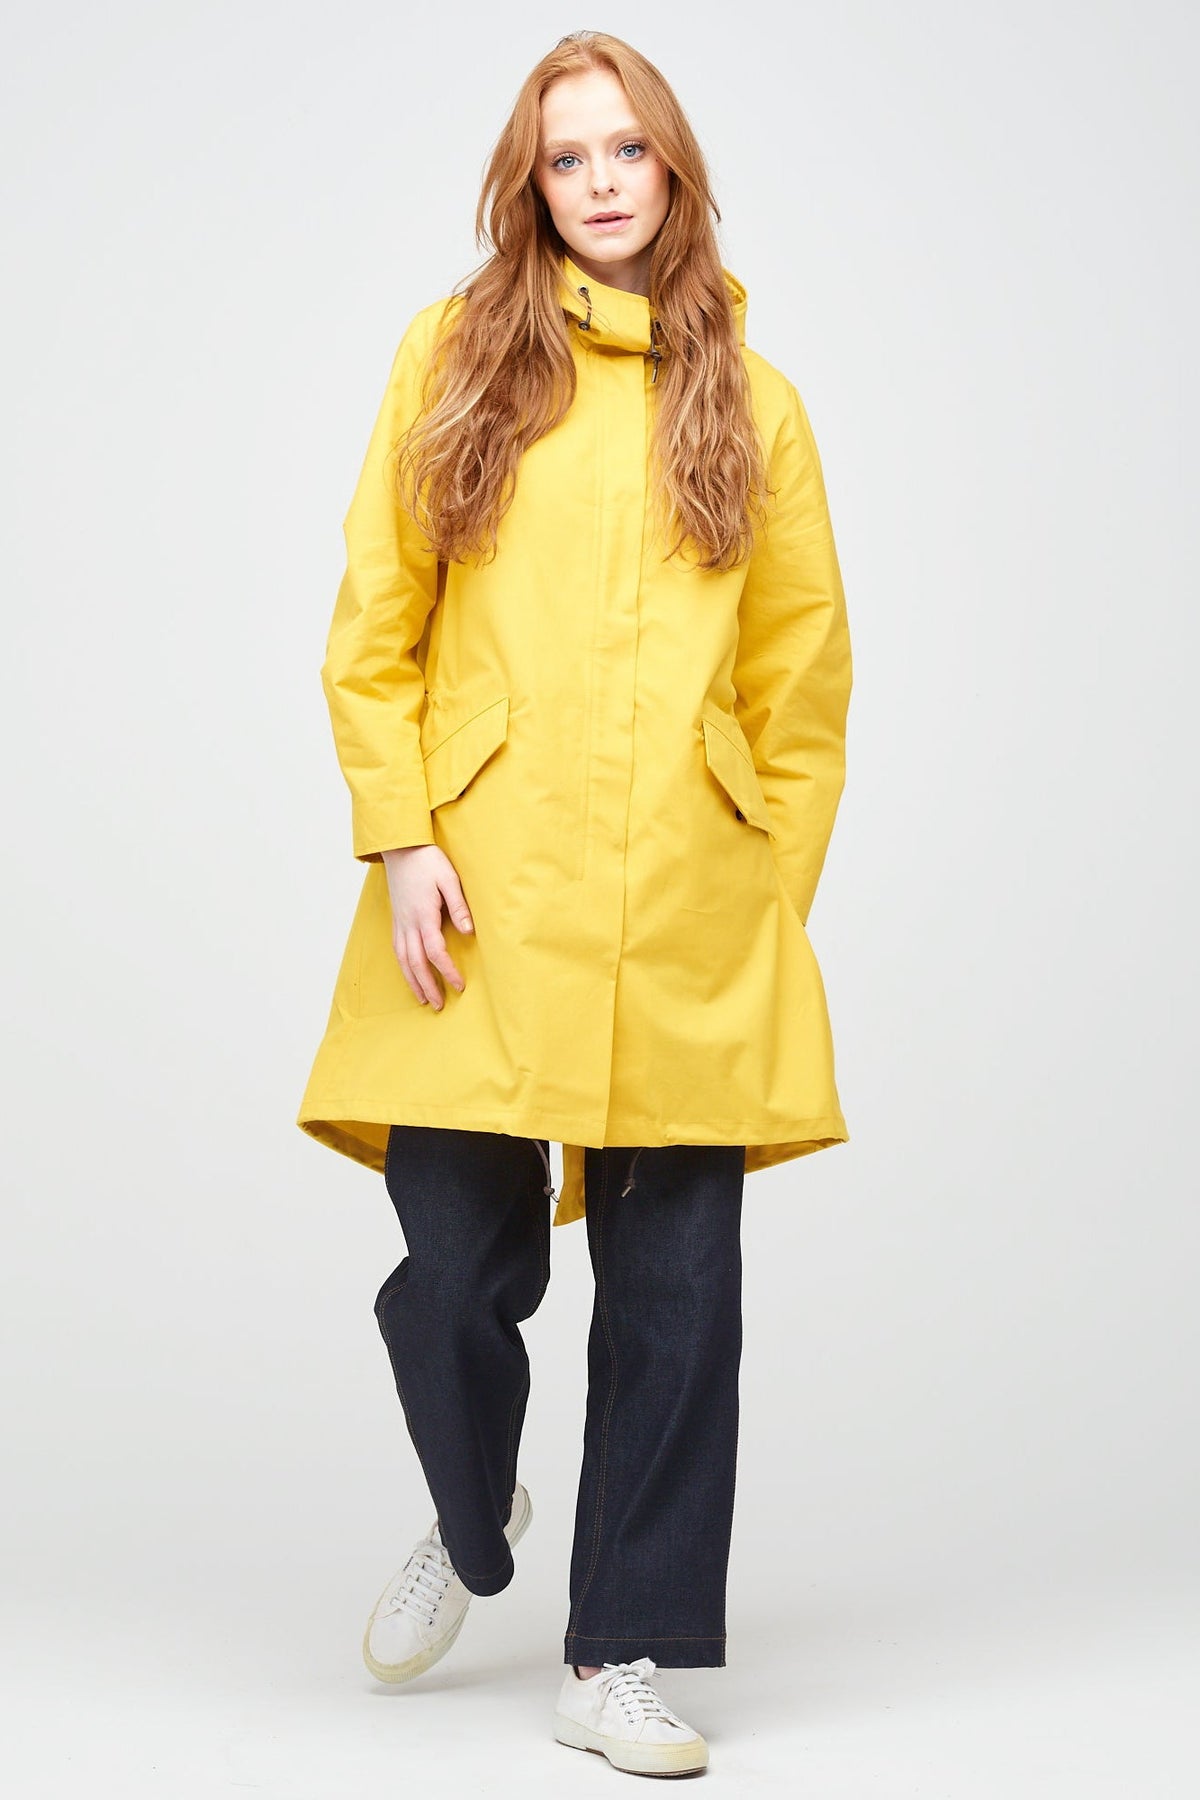 
            a young, white female model with ginger hair wearing long yellow parka fully zipped up. The parka is styled with indigo jeans and a white trainer.